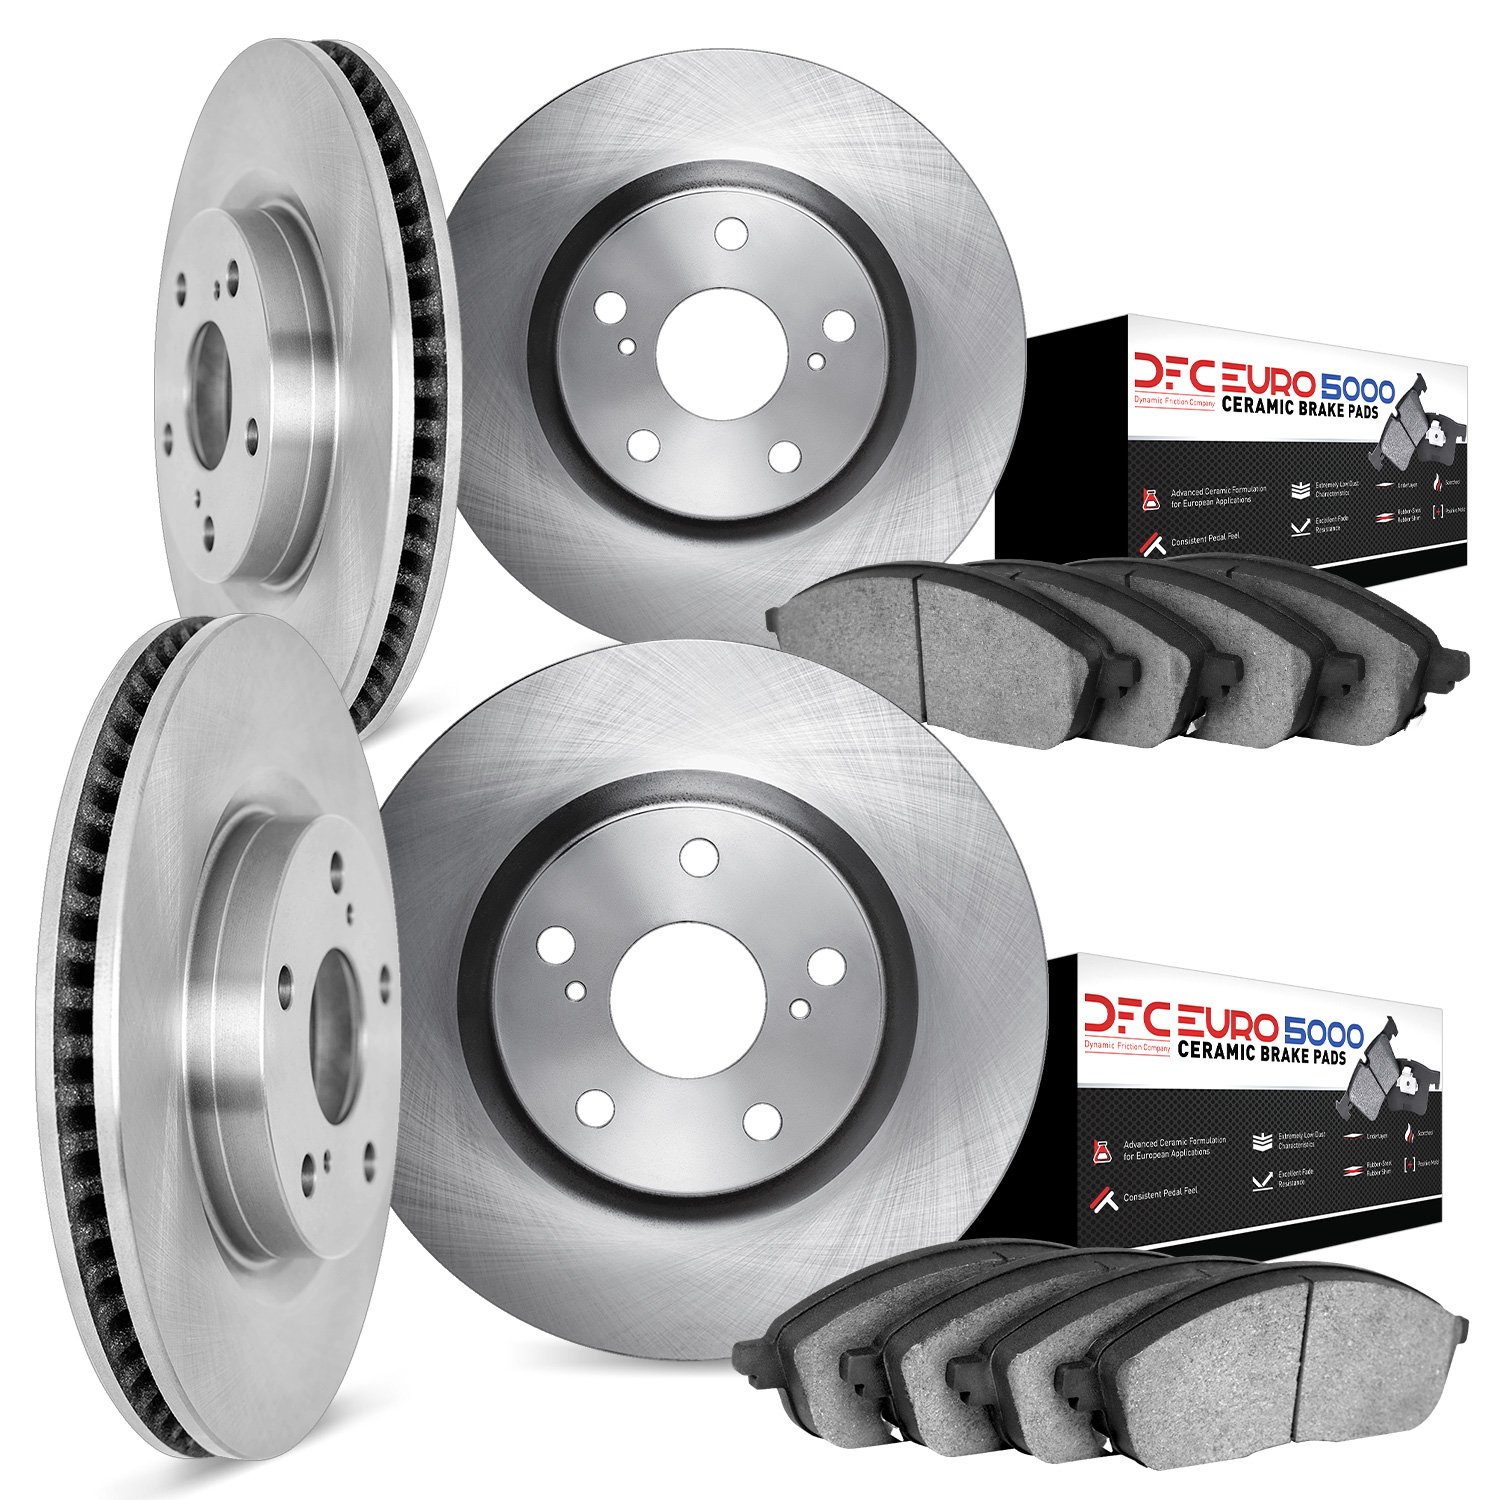 6604-31025 Brake Rotors w/5000 Euro Ceramic Brake Pads, 2013-2020 BMW, Position: Front and Rear